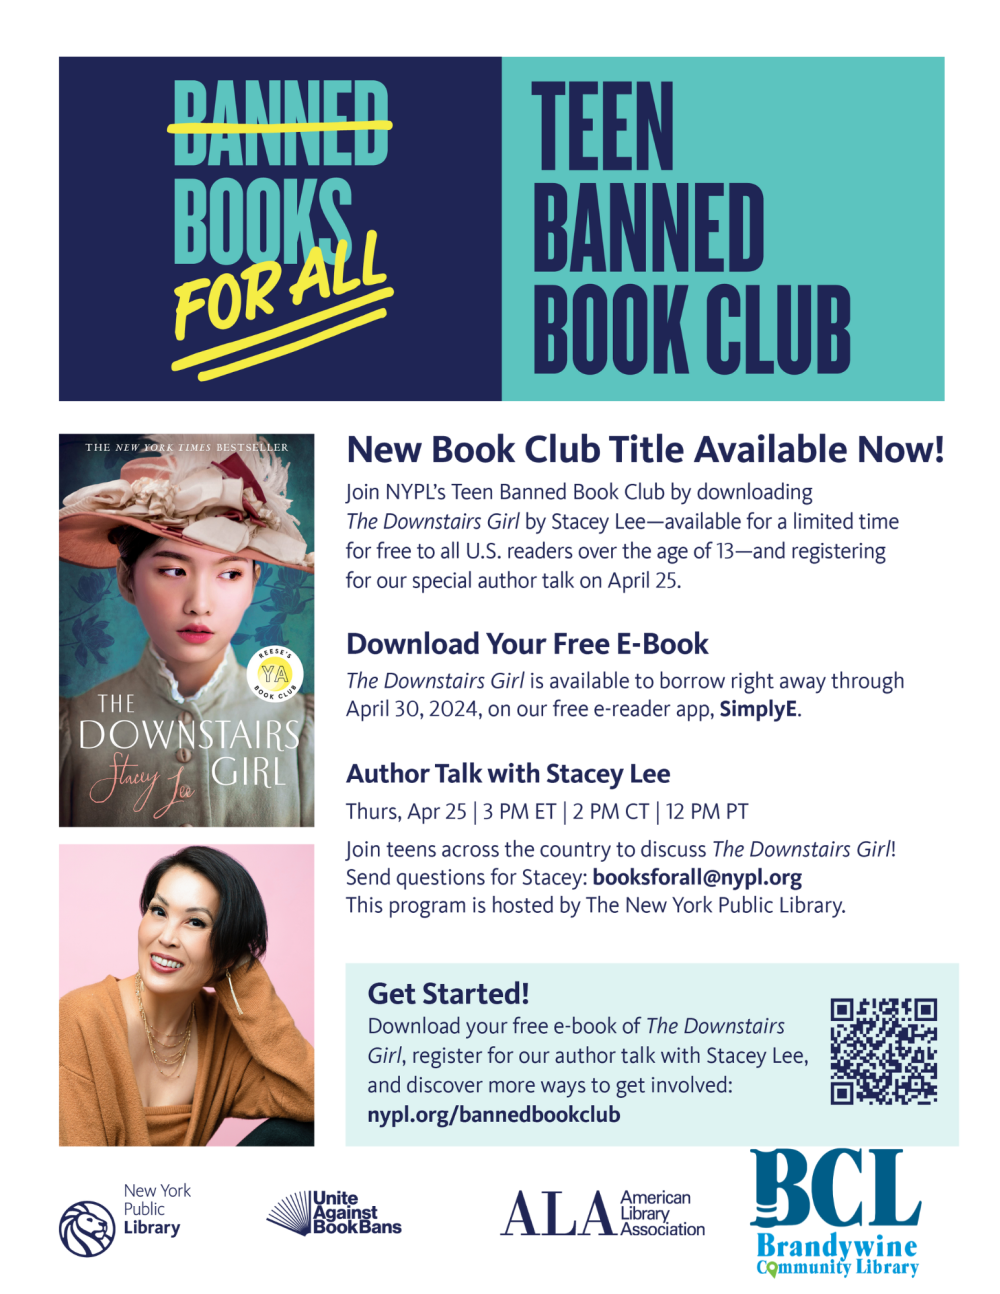 Downstairs girl Banned Book Club